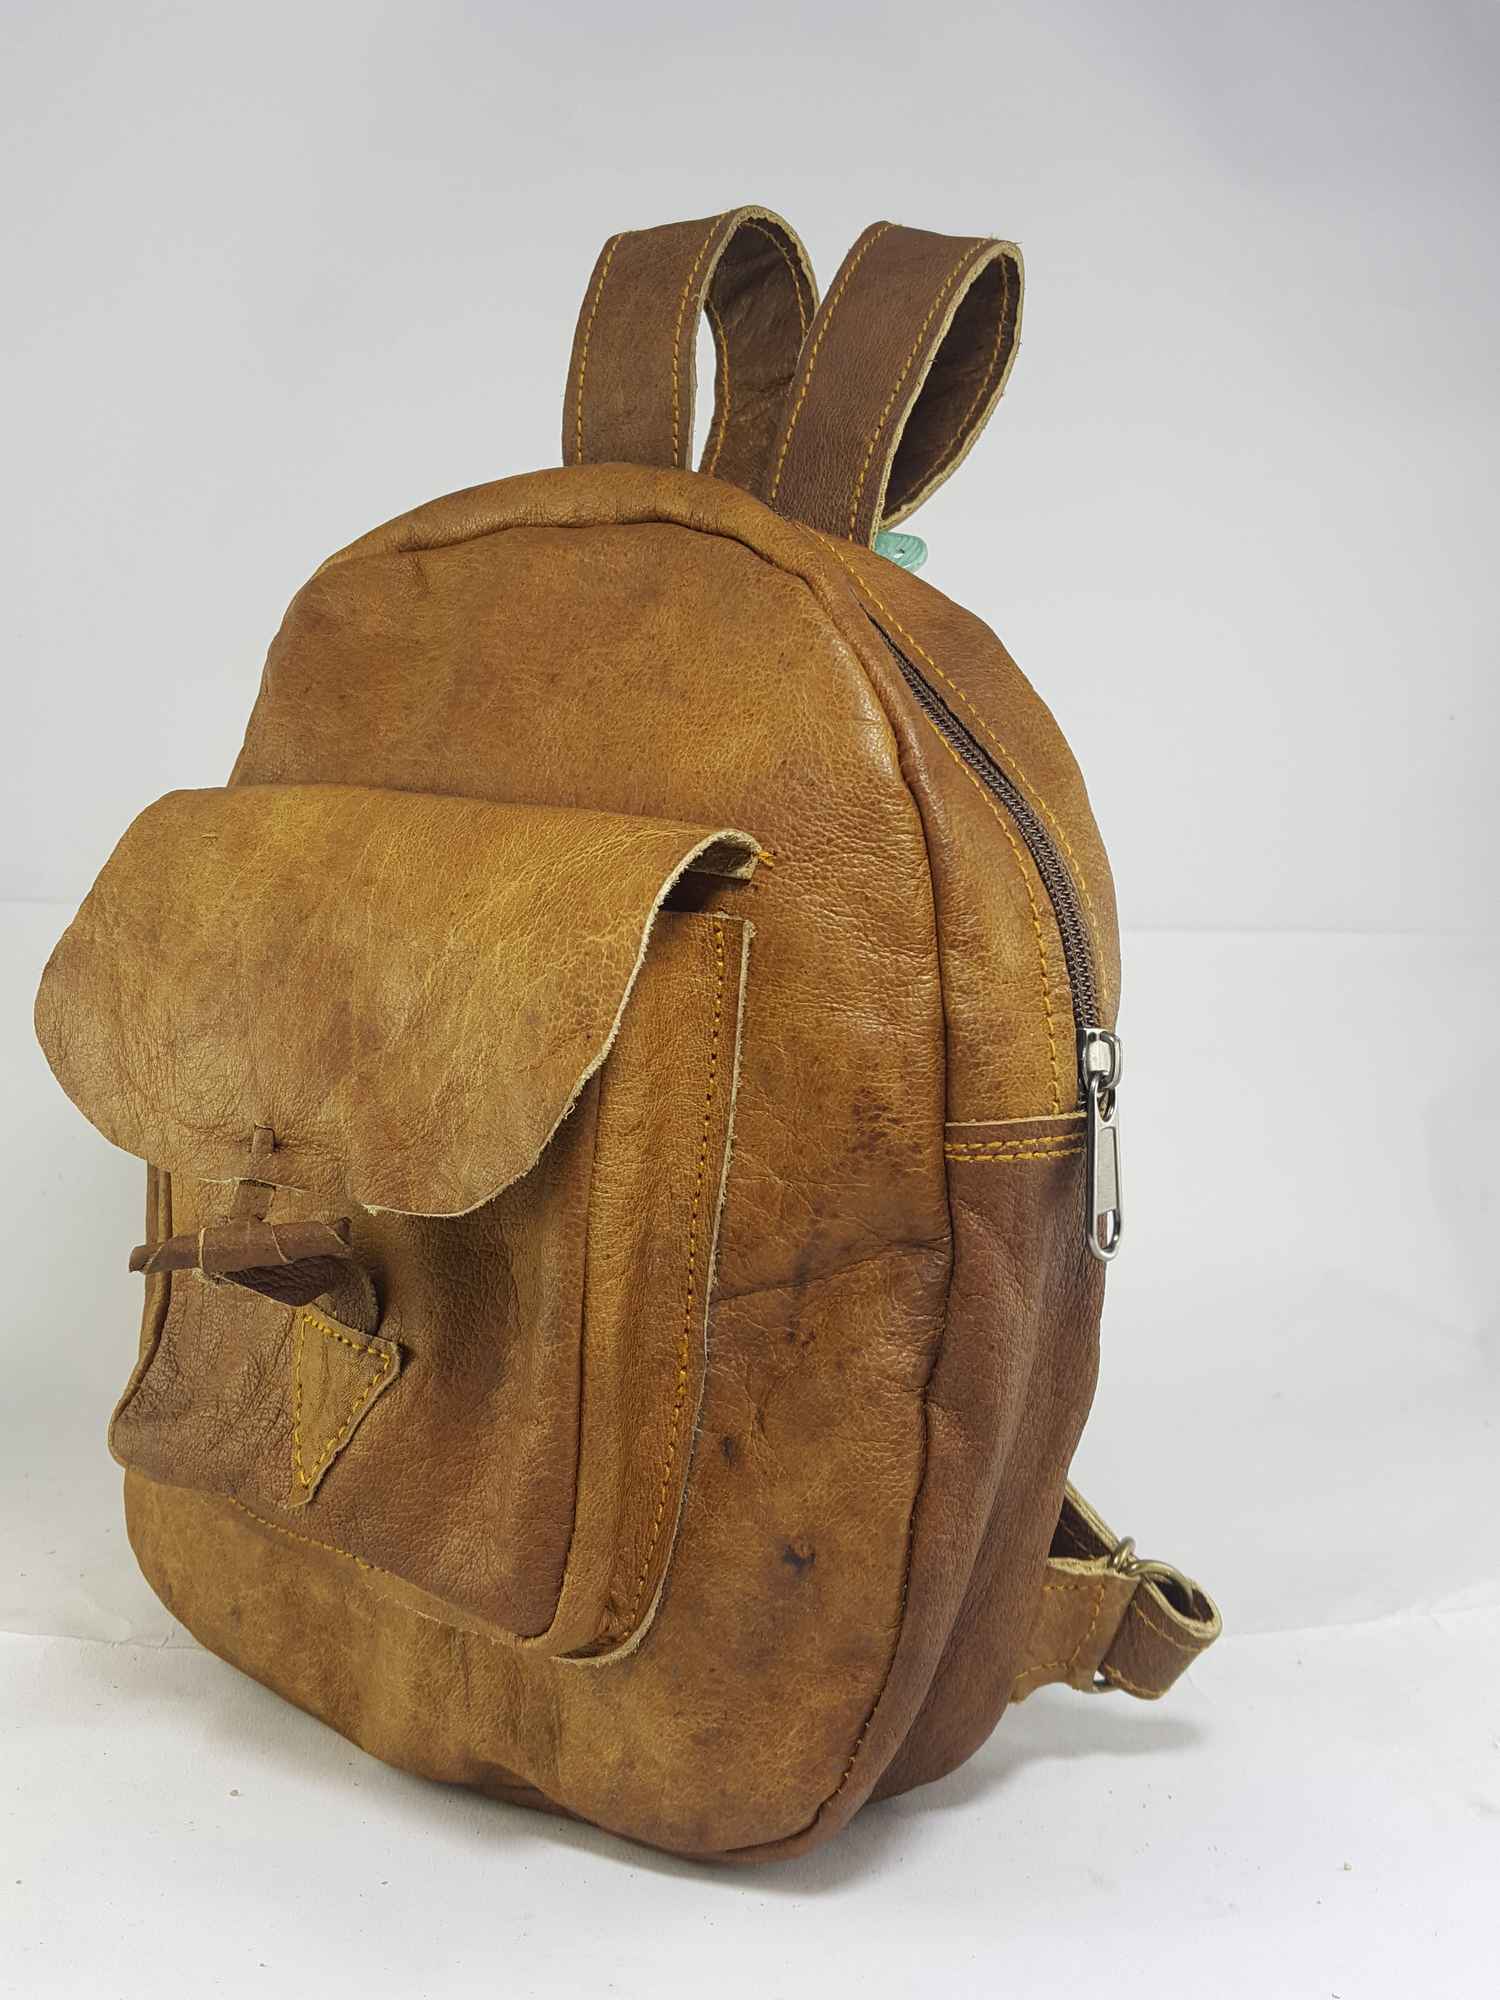 Himalayan Yak Leather Backpack Bag 2 Pocket, 1 Zip, leather Button Lock